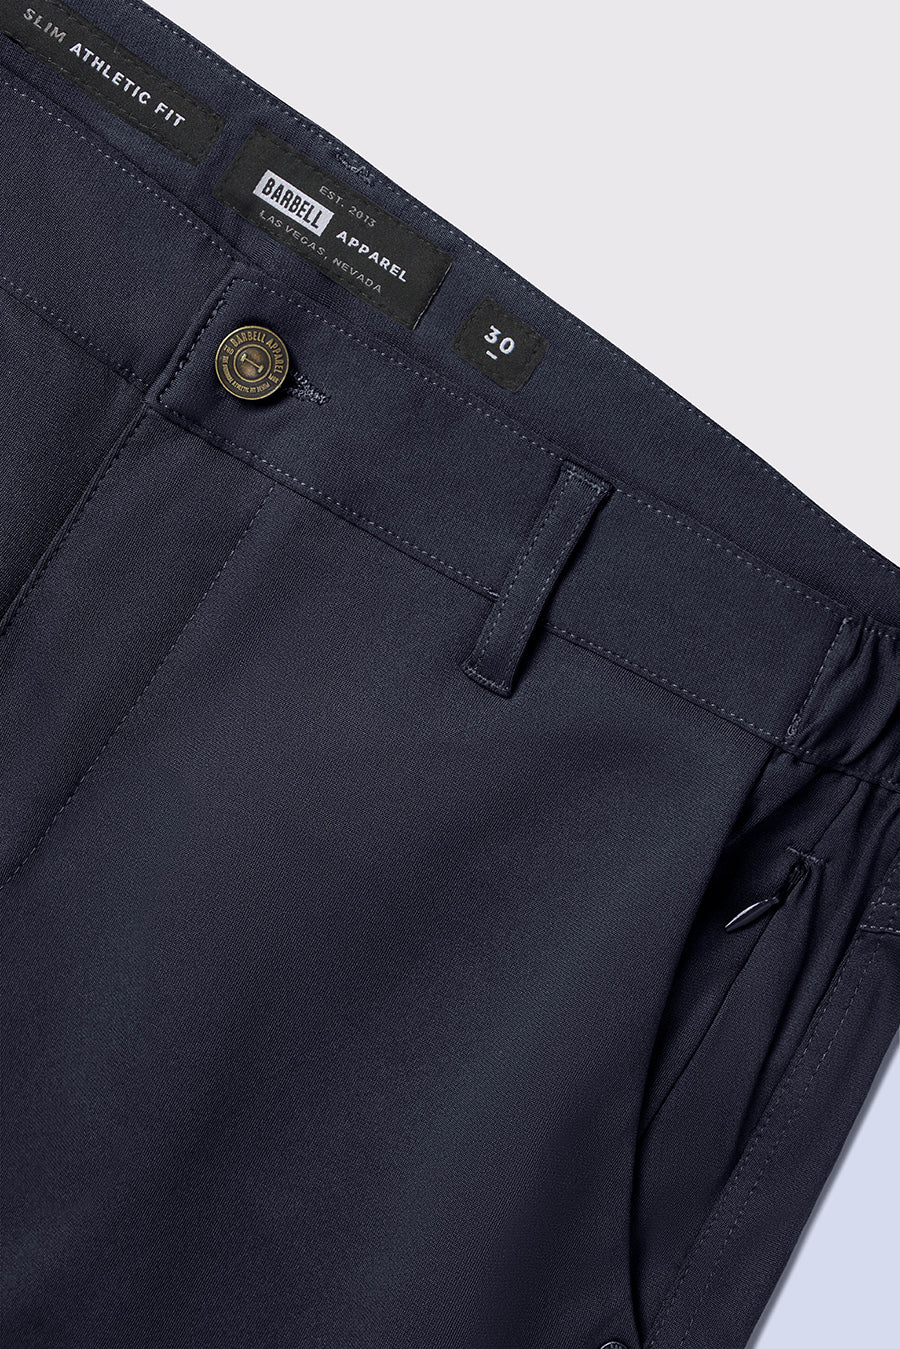 Anything Dress Pant Slim - Navy - photo from detail flat lay #color_navy